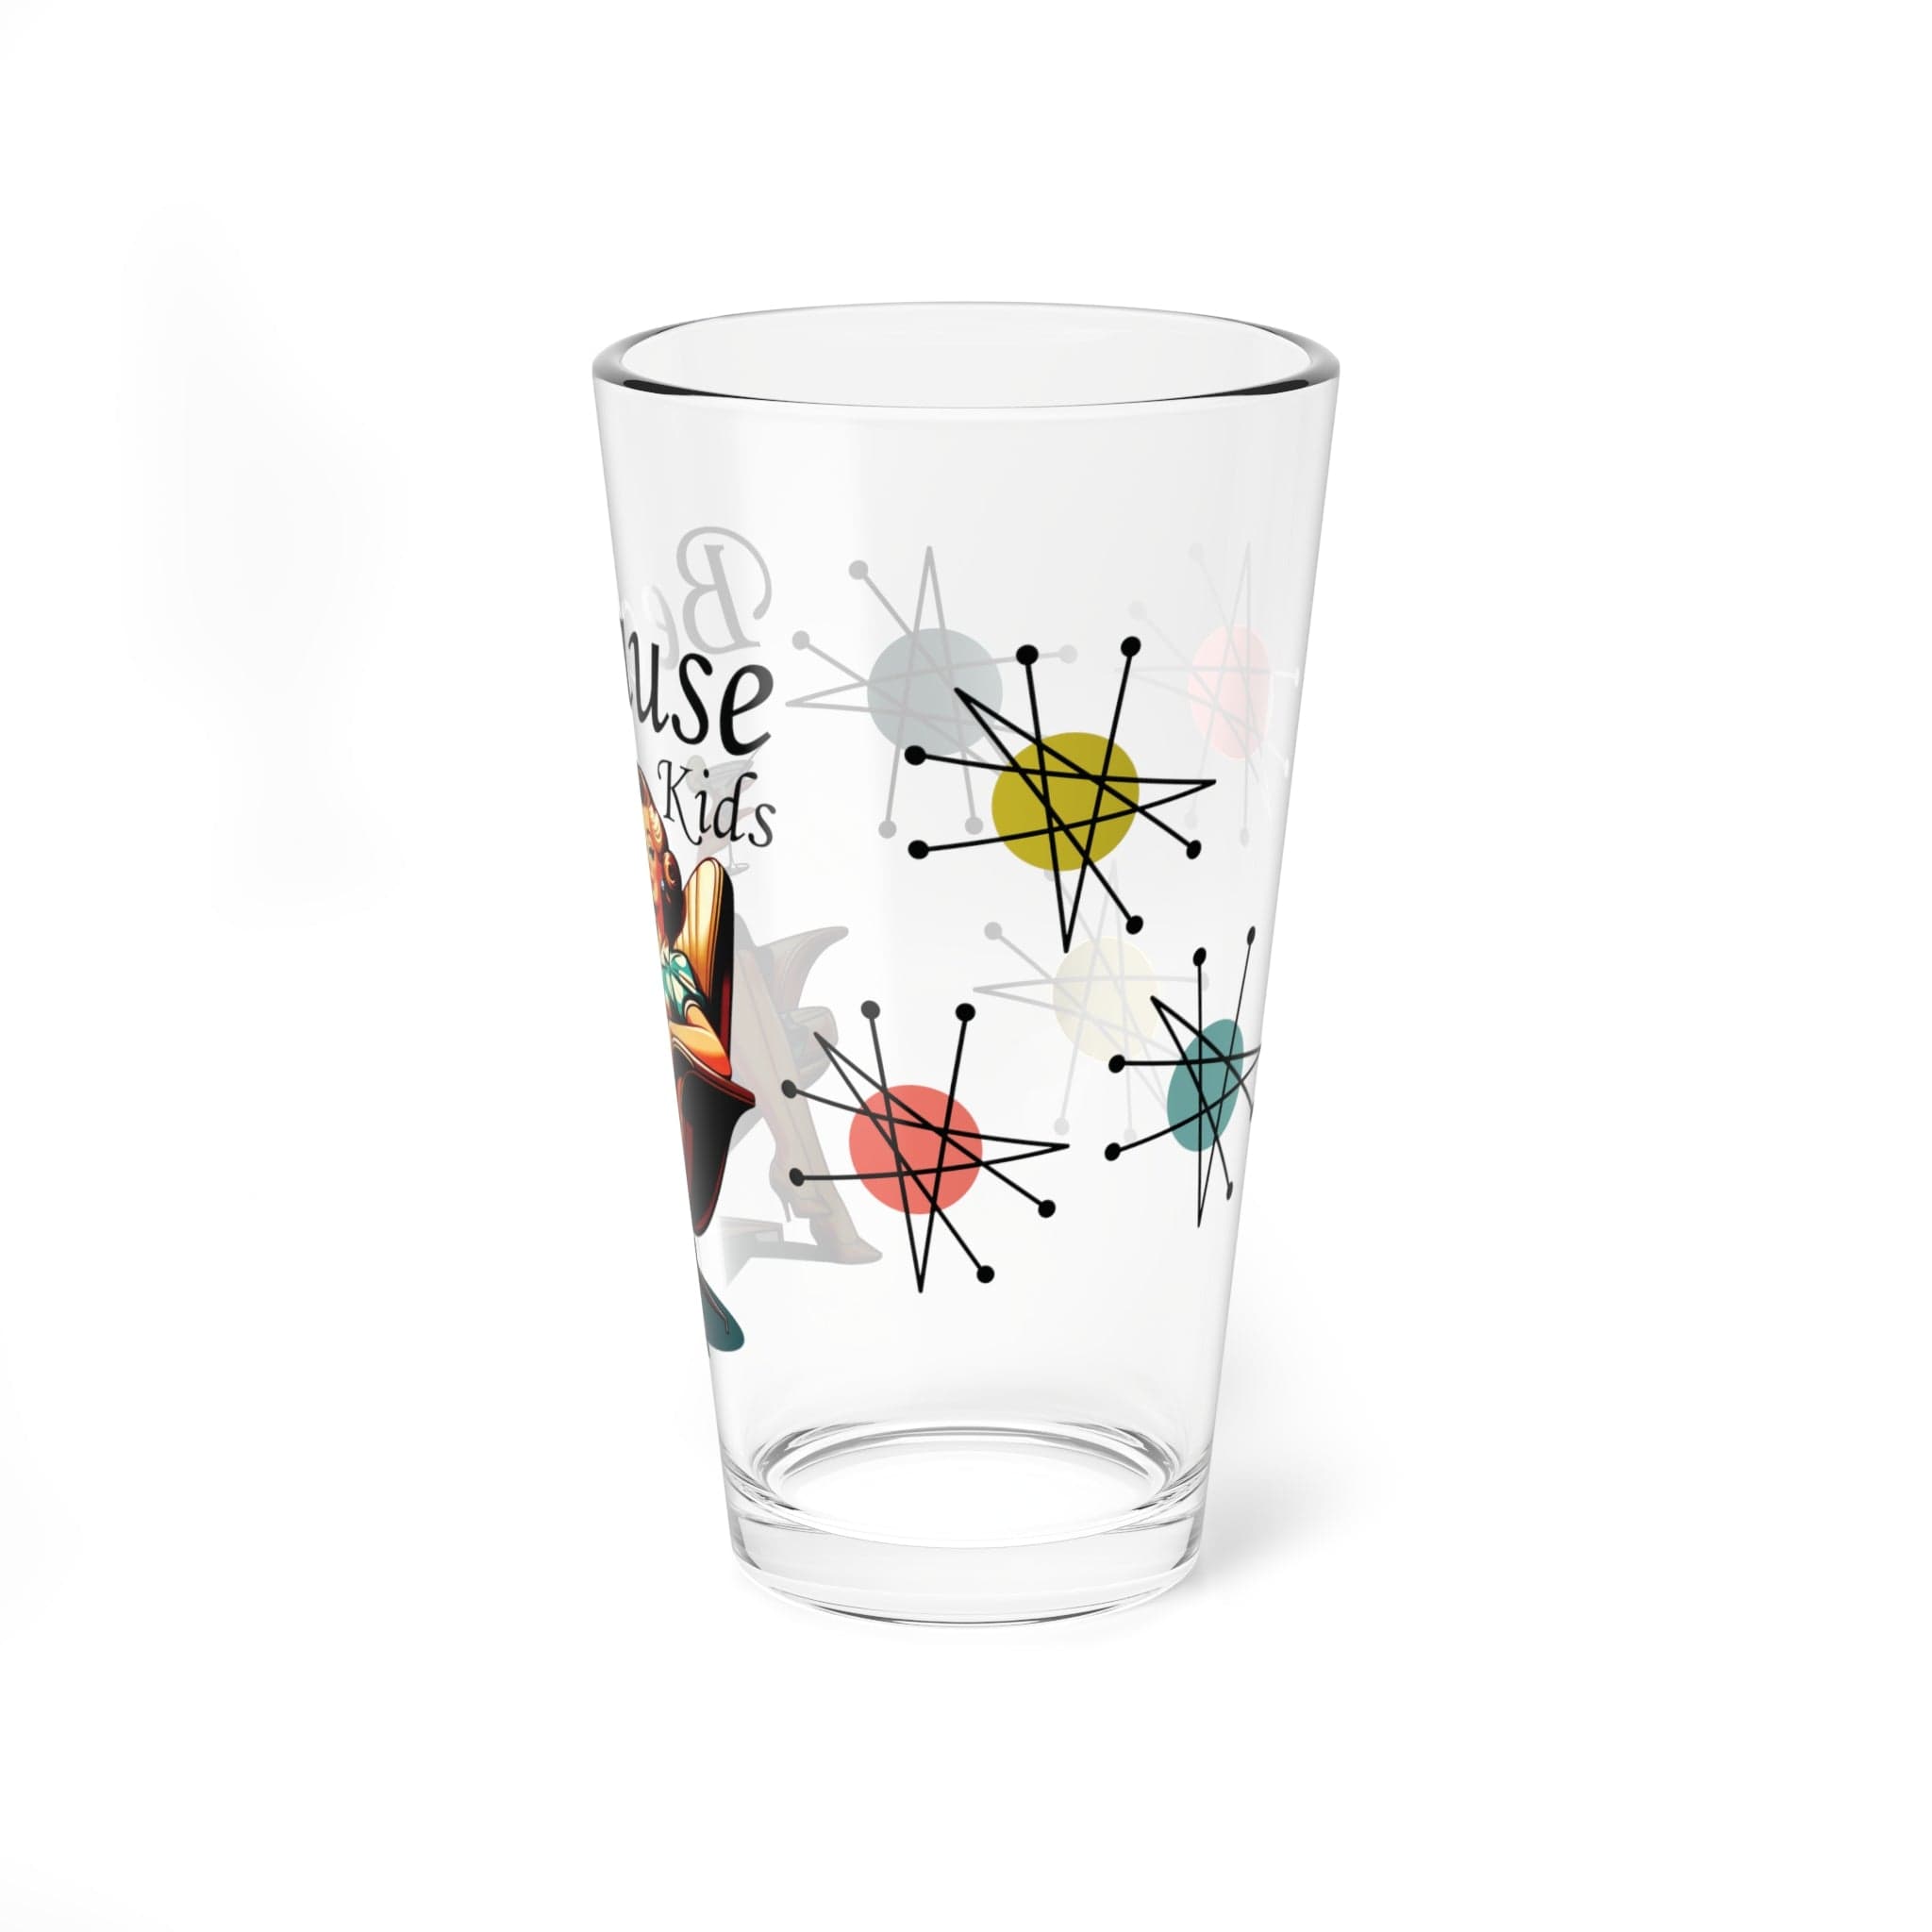 Kate McEnroe New York Kitschy 1950s Mid Century Modern Because Kids Pint Glass, Funny Gift for Mom, MCM Cocktail Shaker, Mixing, Drinking, Beer Glass Mixing Glasses 16oz 55969340391080520723